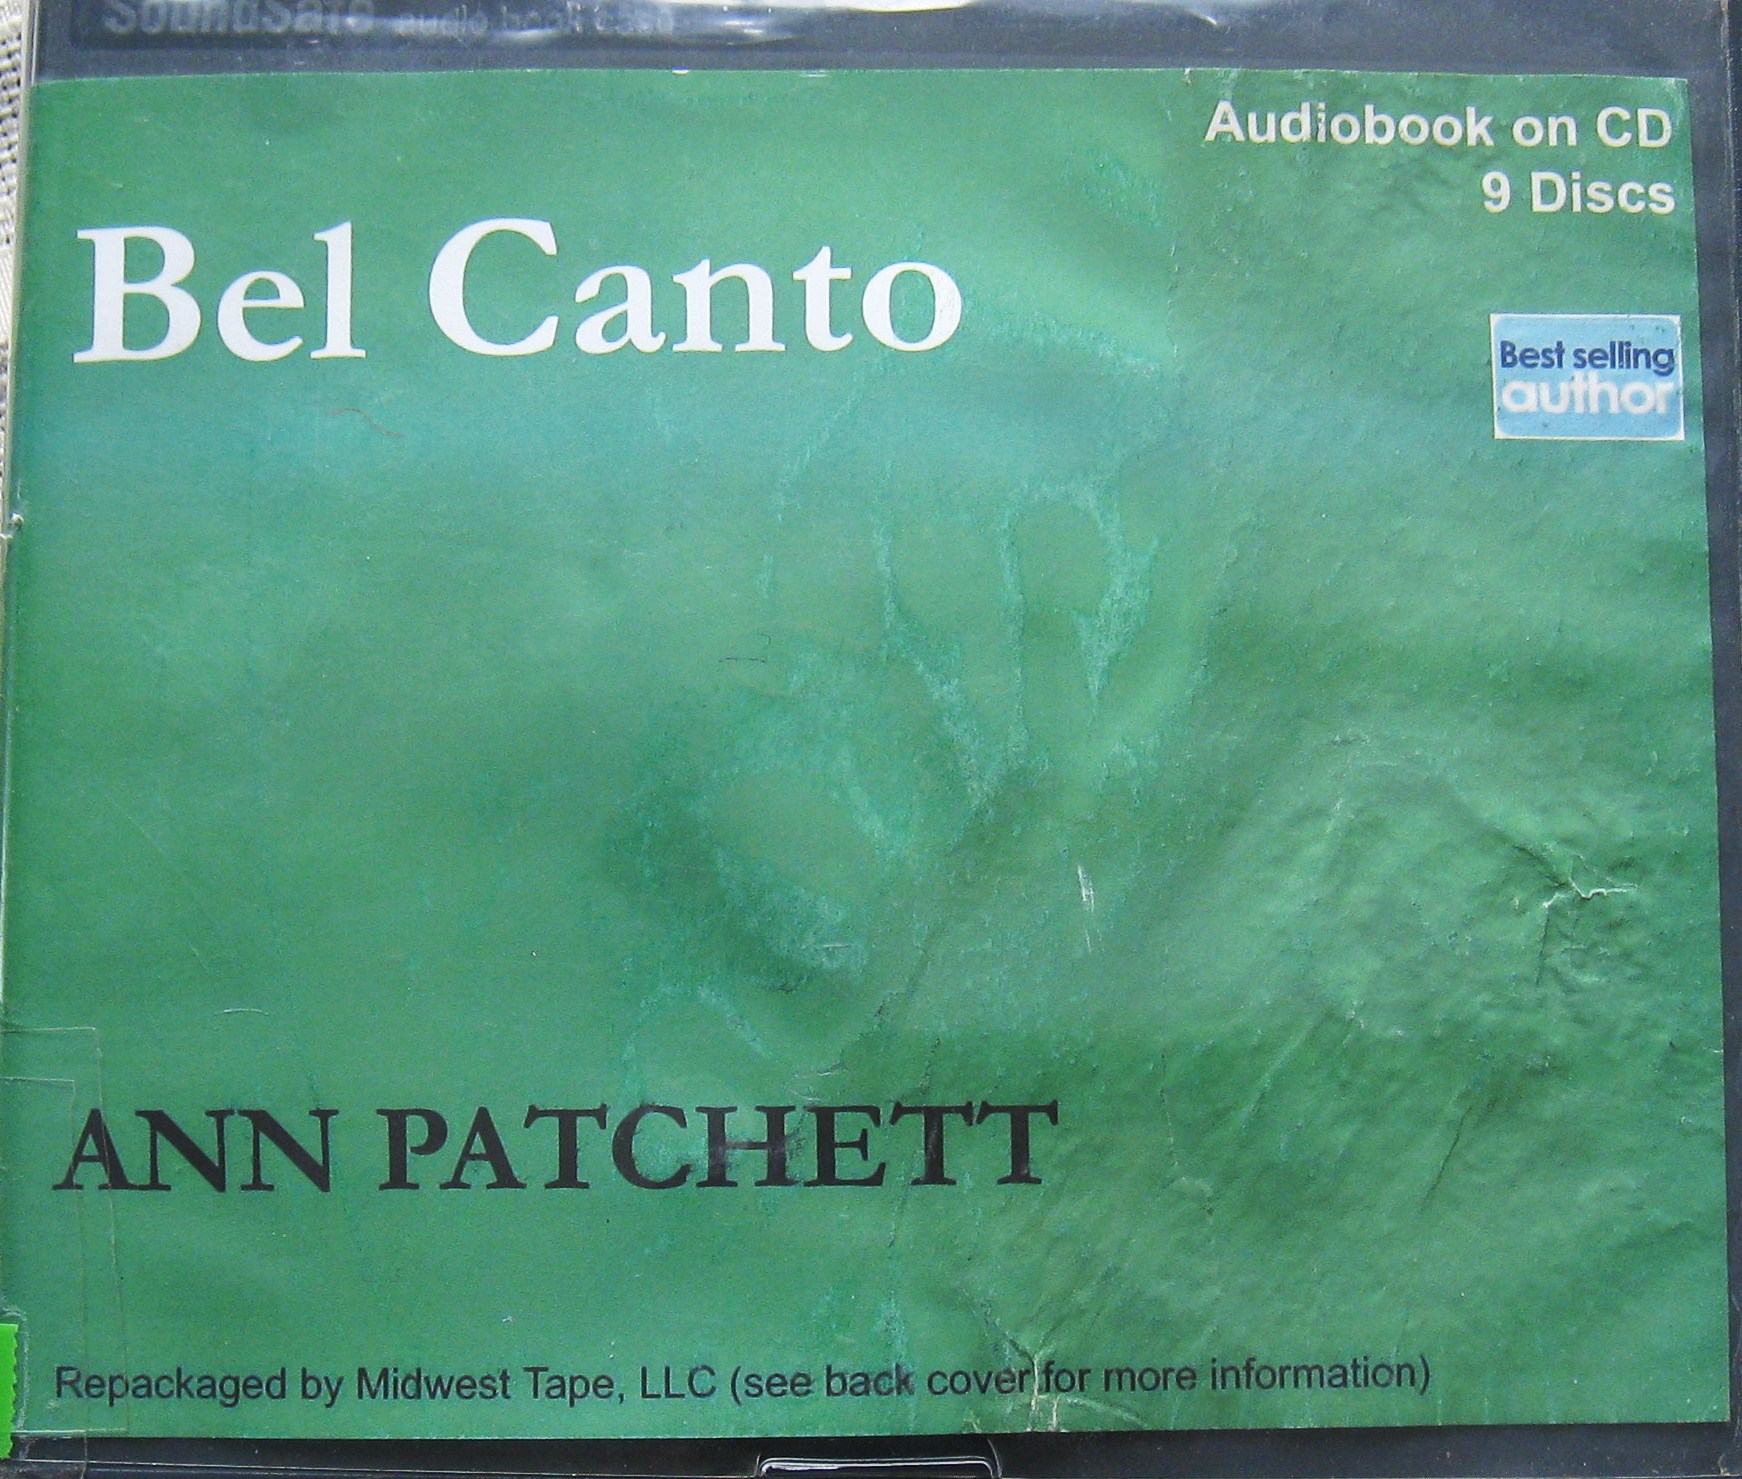 bel canto